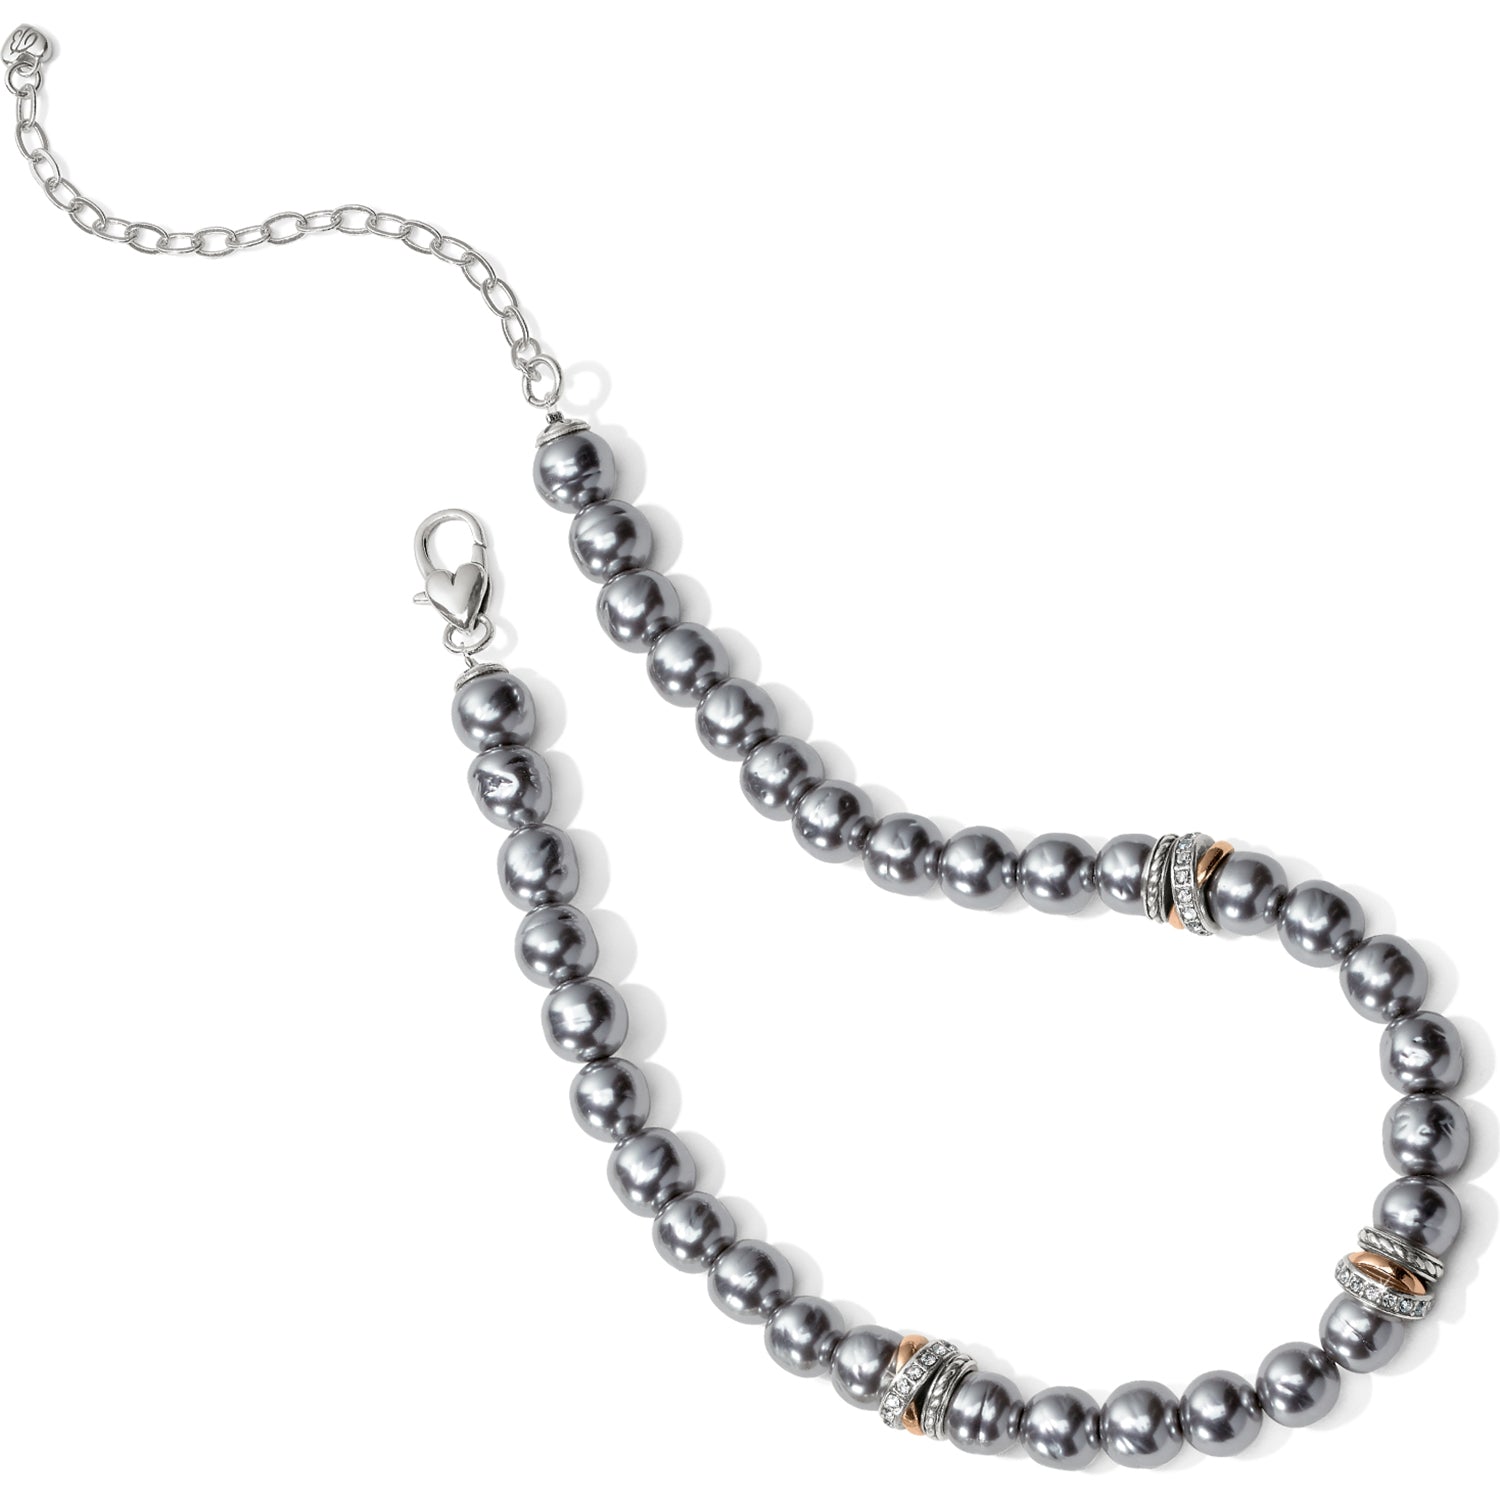 Neptune's Rings Gray Pearl Short Necklace